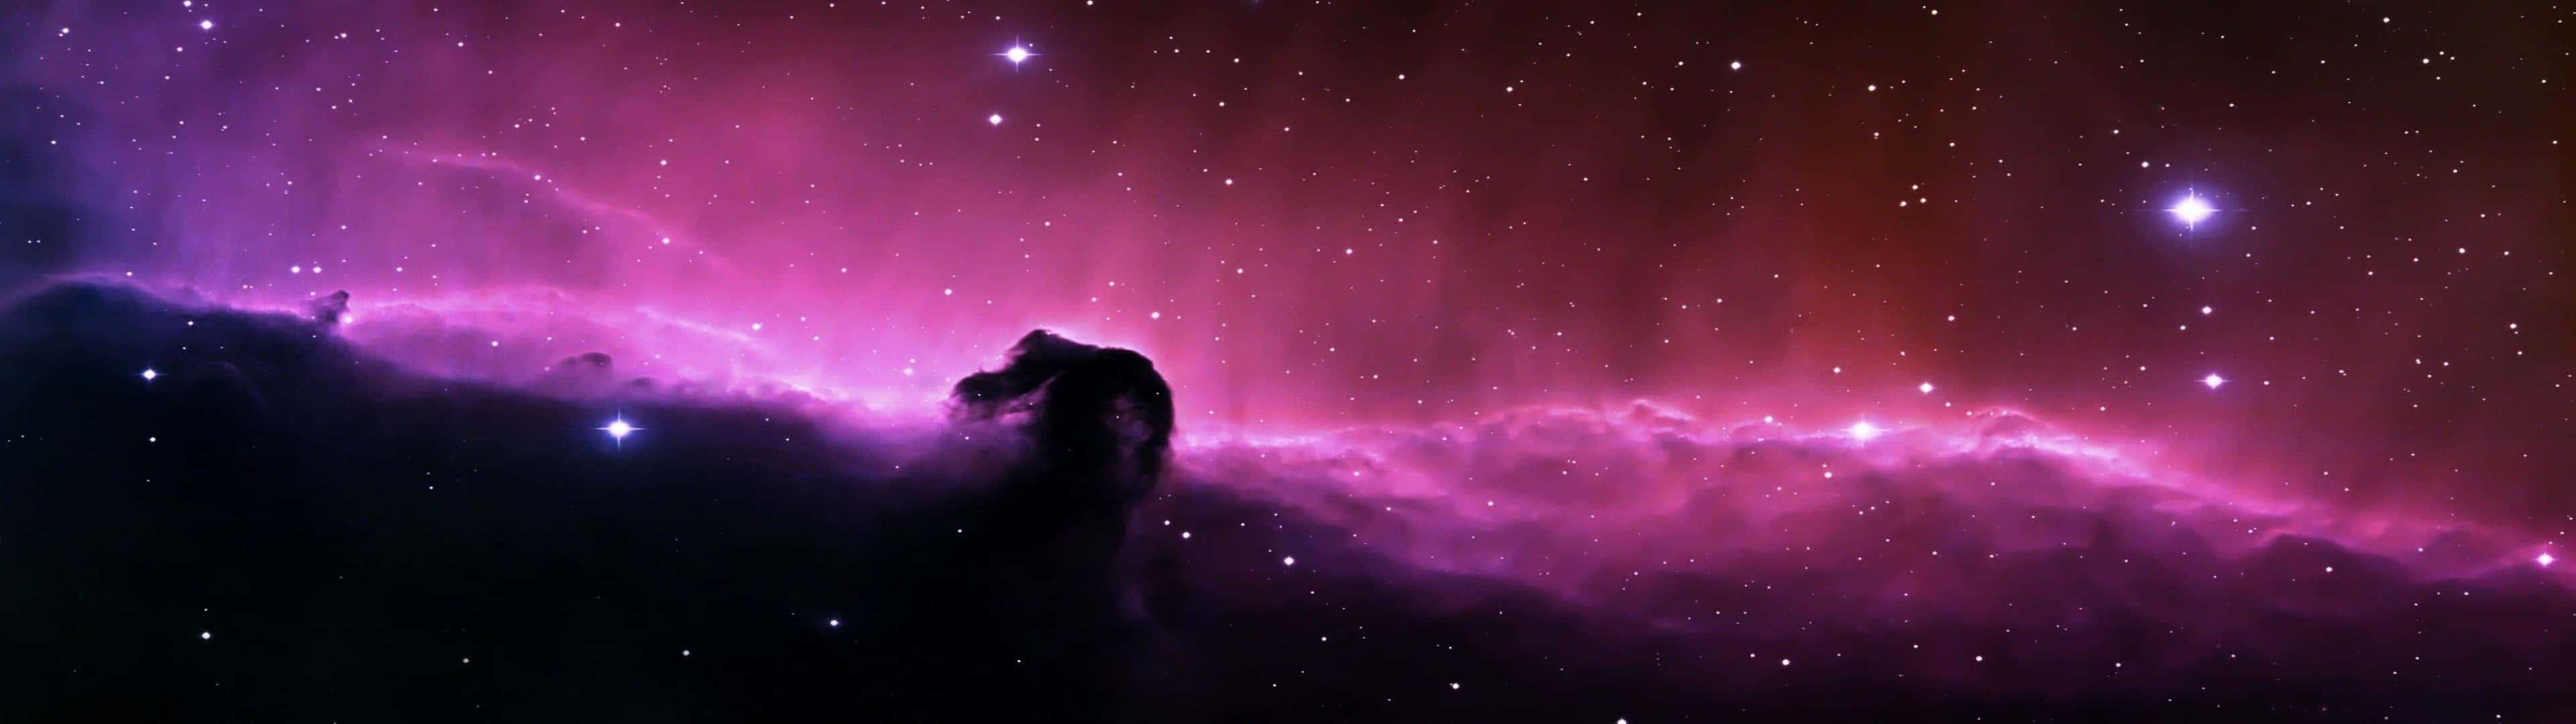 A Purple Nebula With Stars In The Background Wallpaper